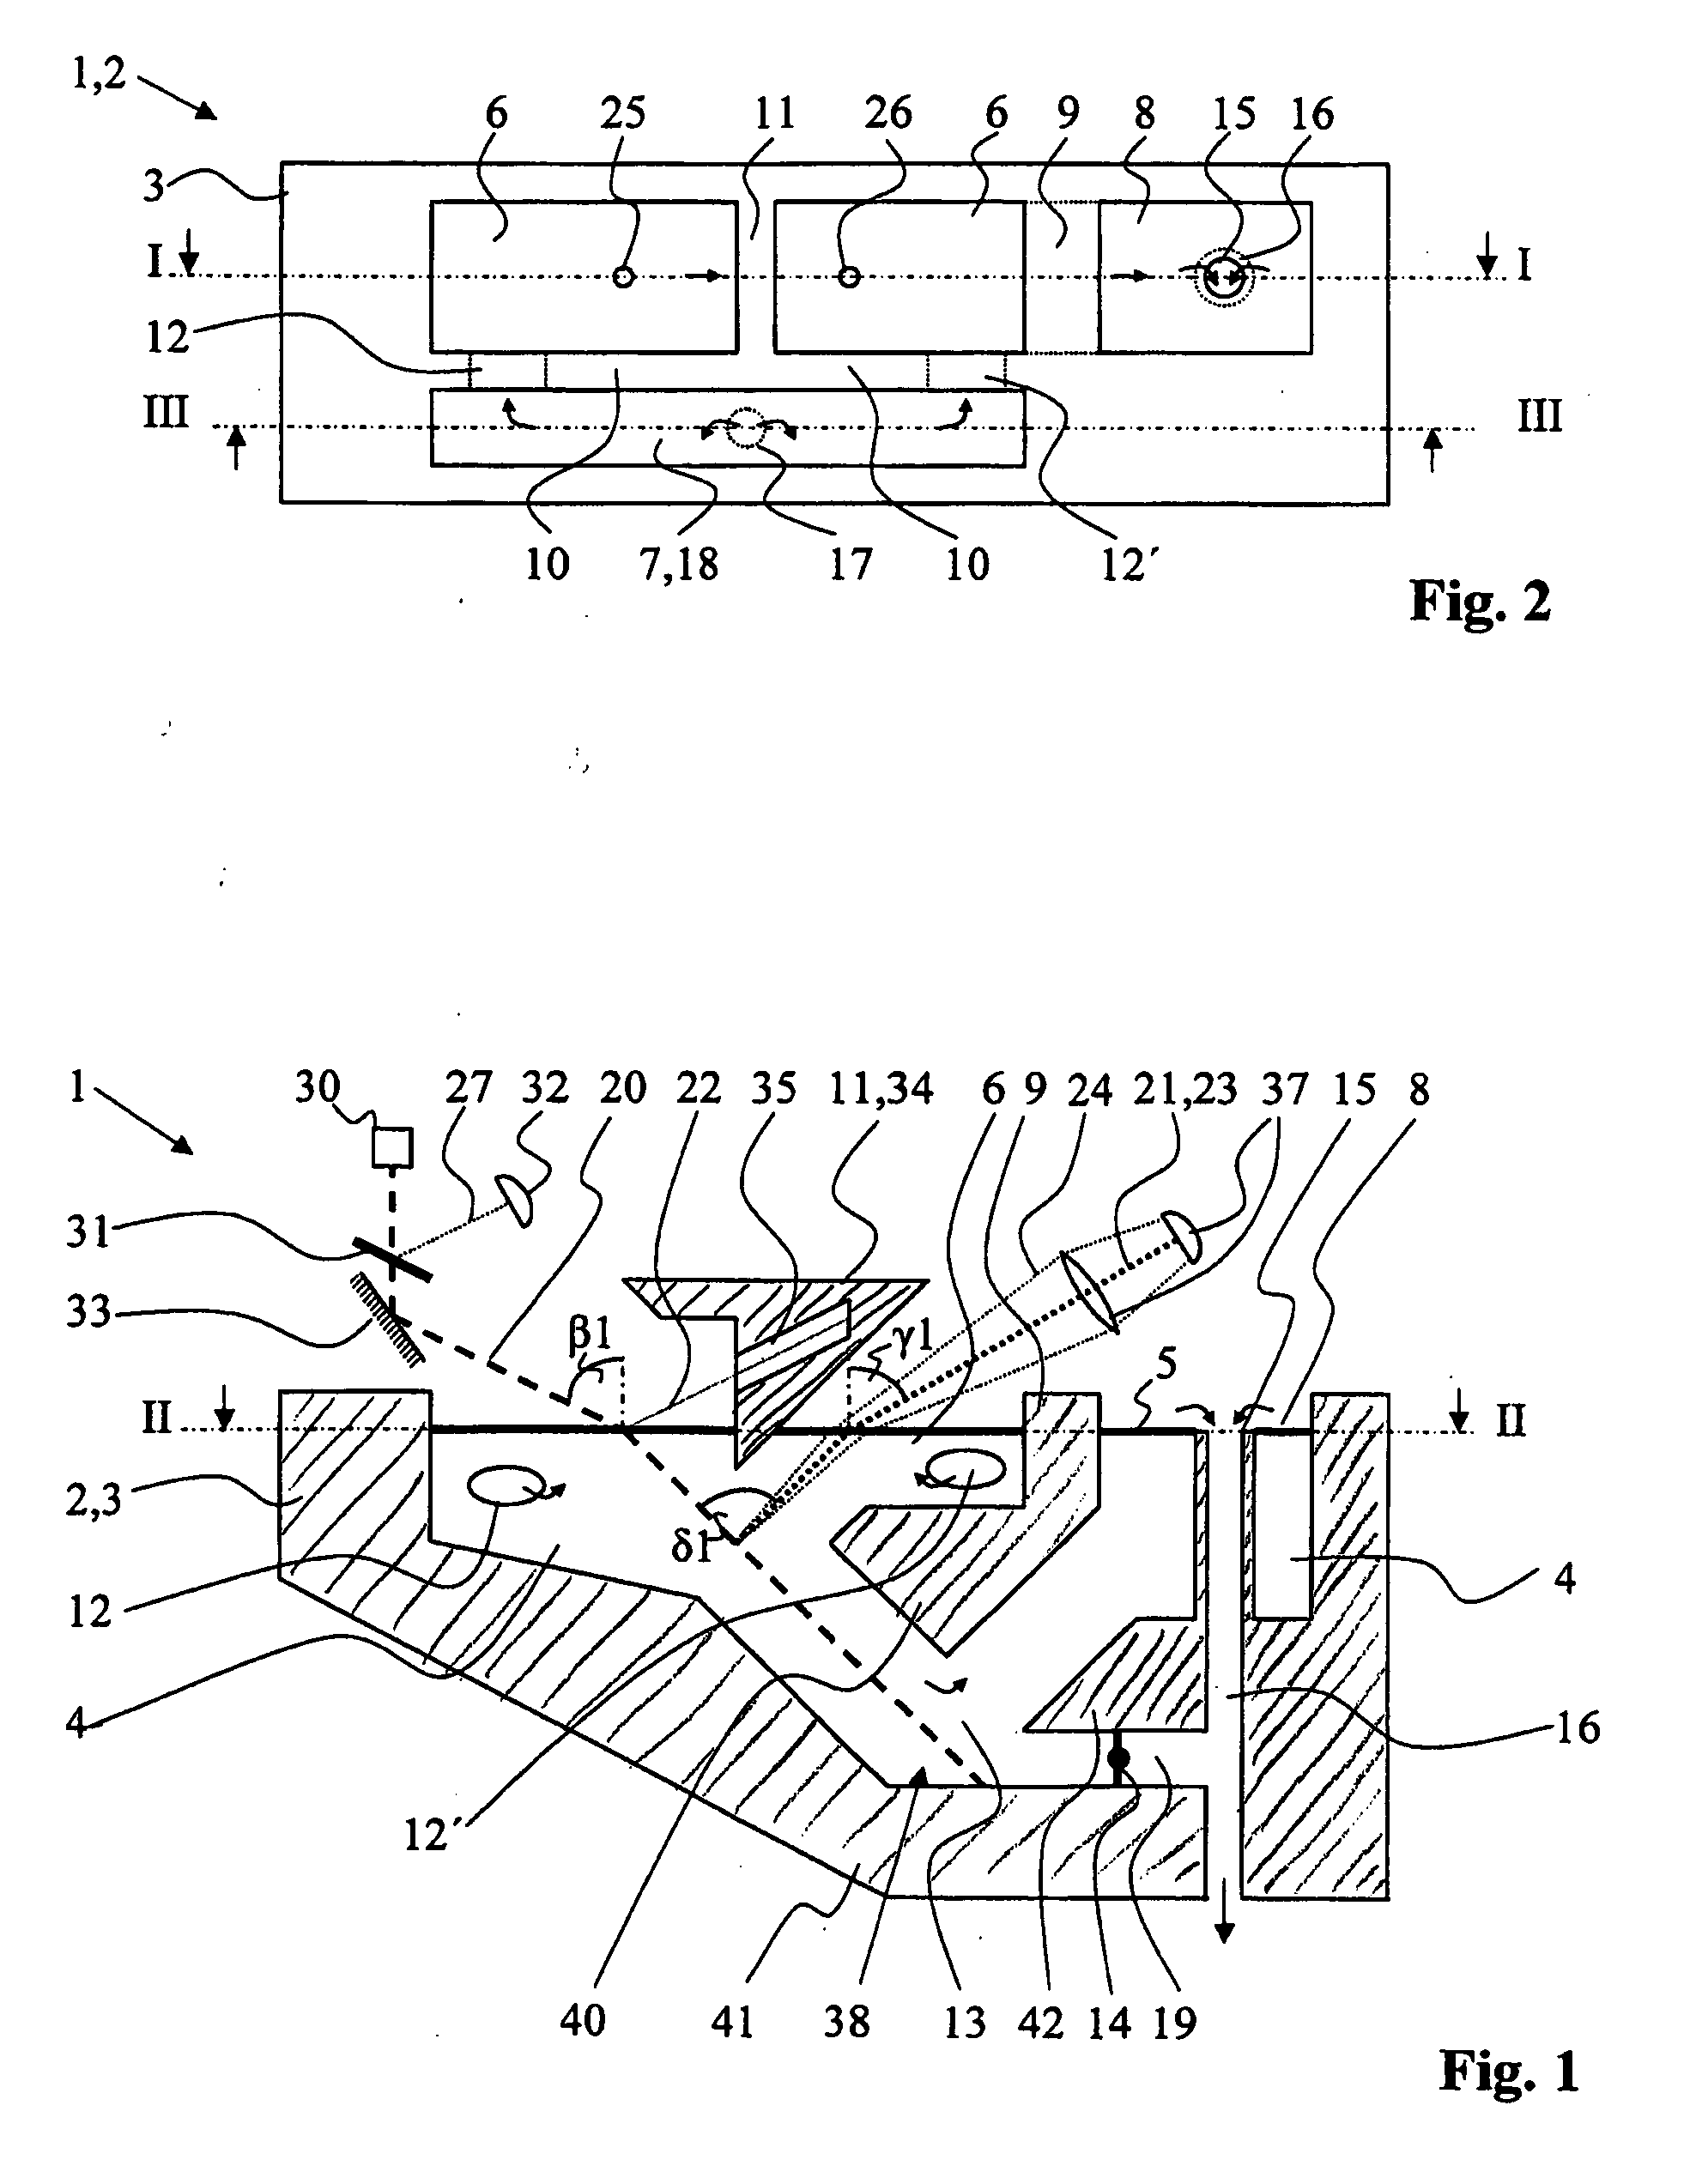 Photometric method and apparatus for measuring a liquid's turbidity, fluorescence, phosphorescence and/or absorption coefficient